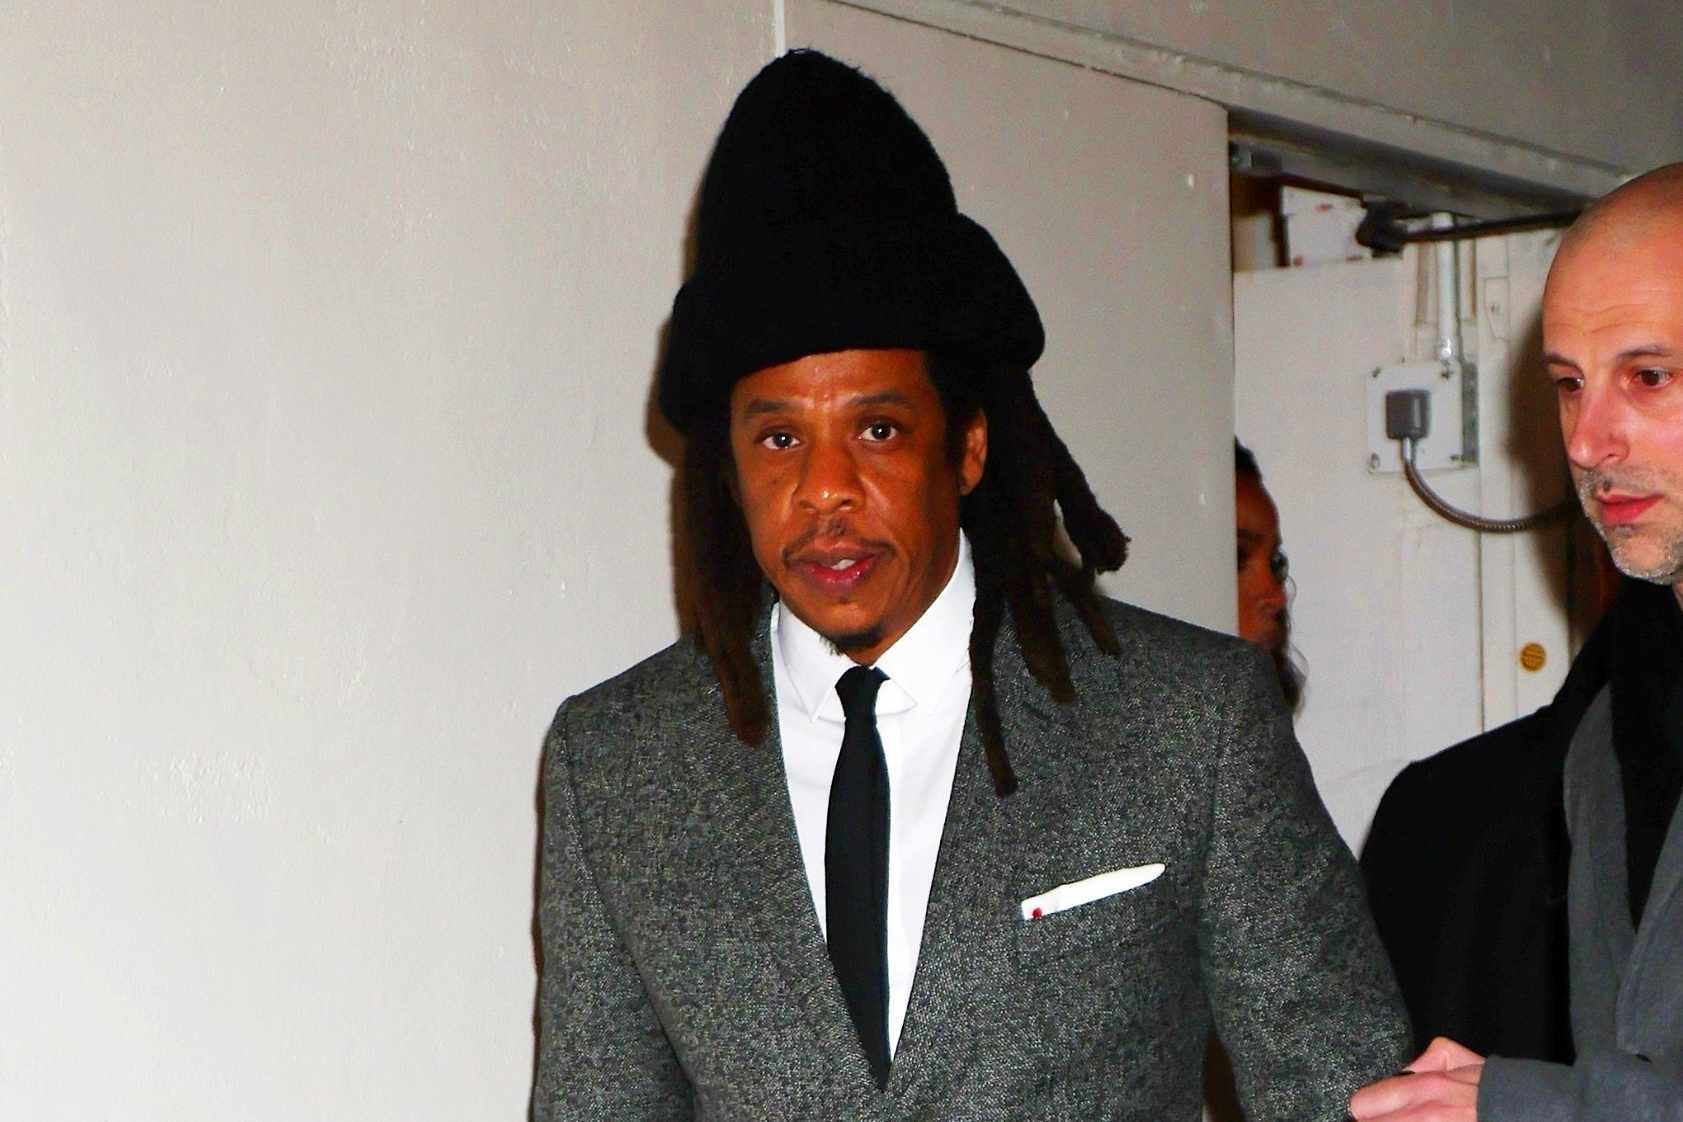 JAY-Z wears a tall black beanie and grey suit with white shirt at the mea culpa movie premiere